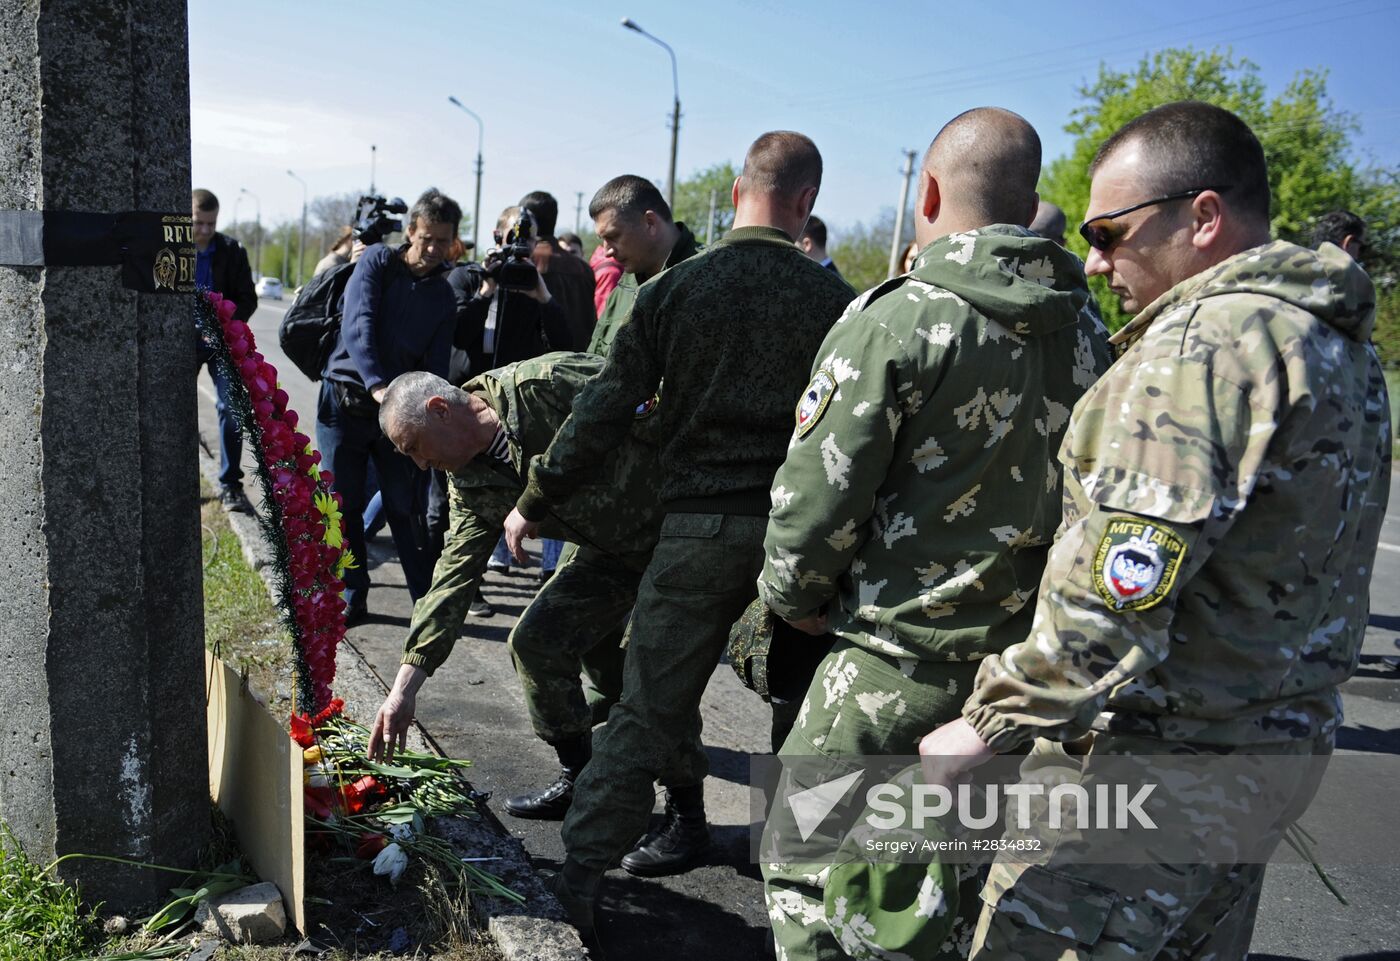 Memorial service for those killed at Yelenovka checkpoint in DPR